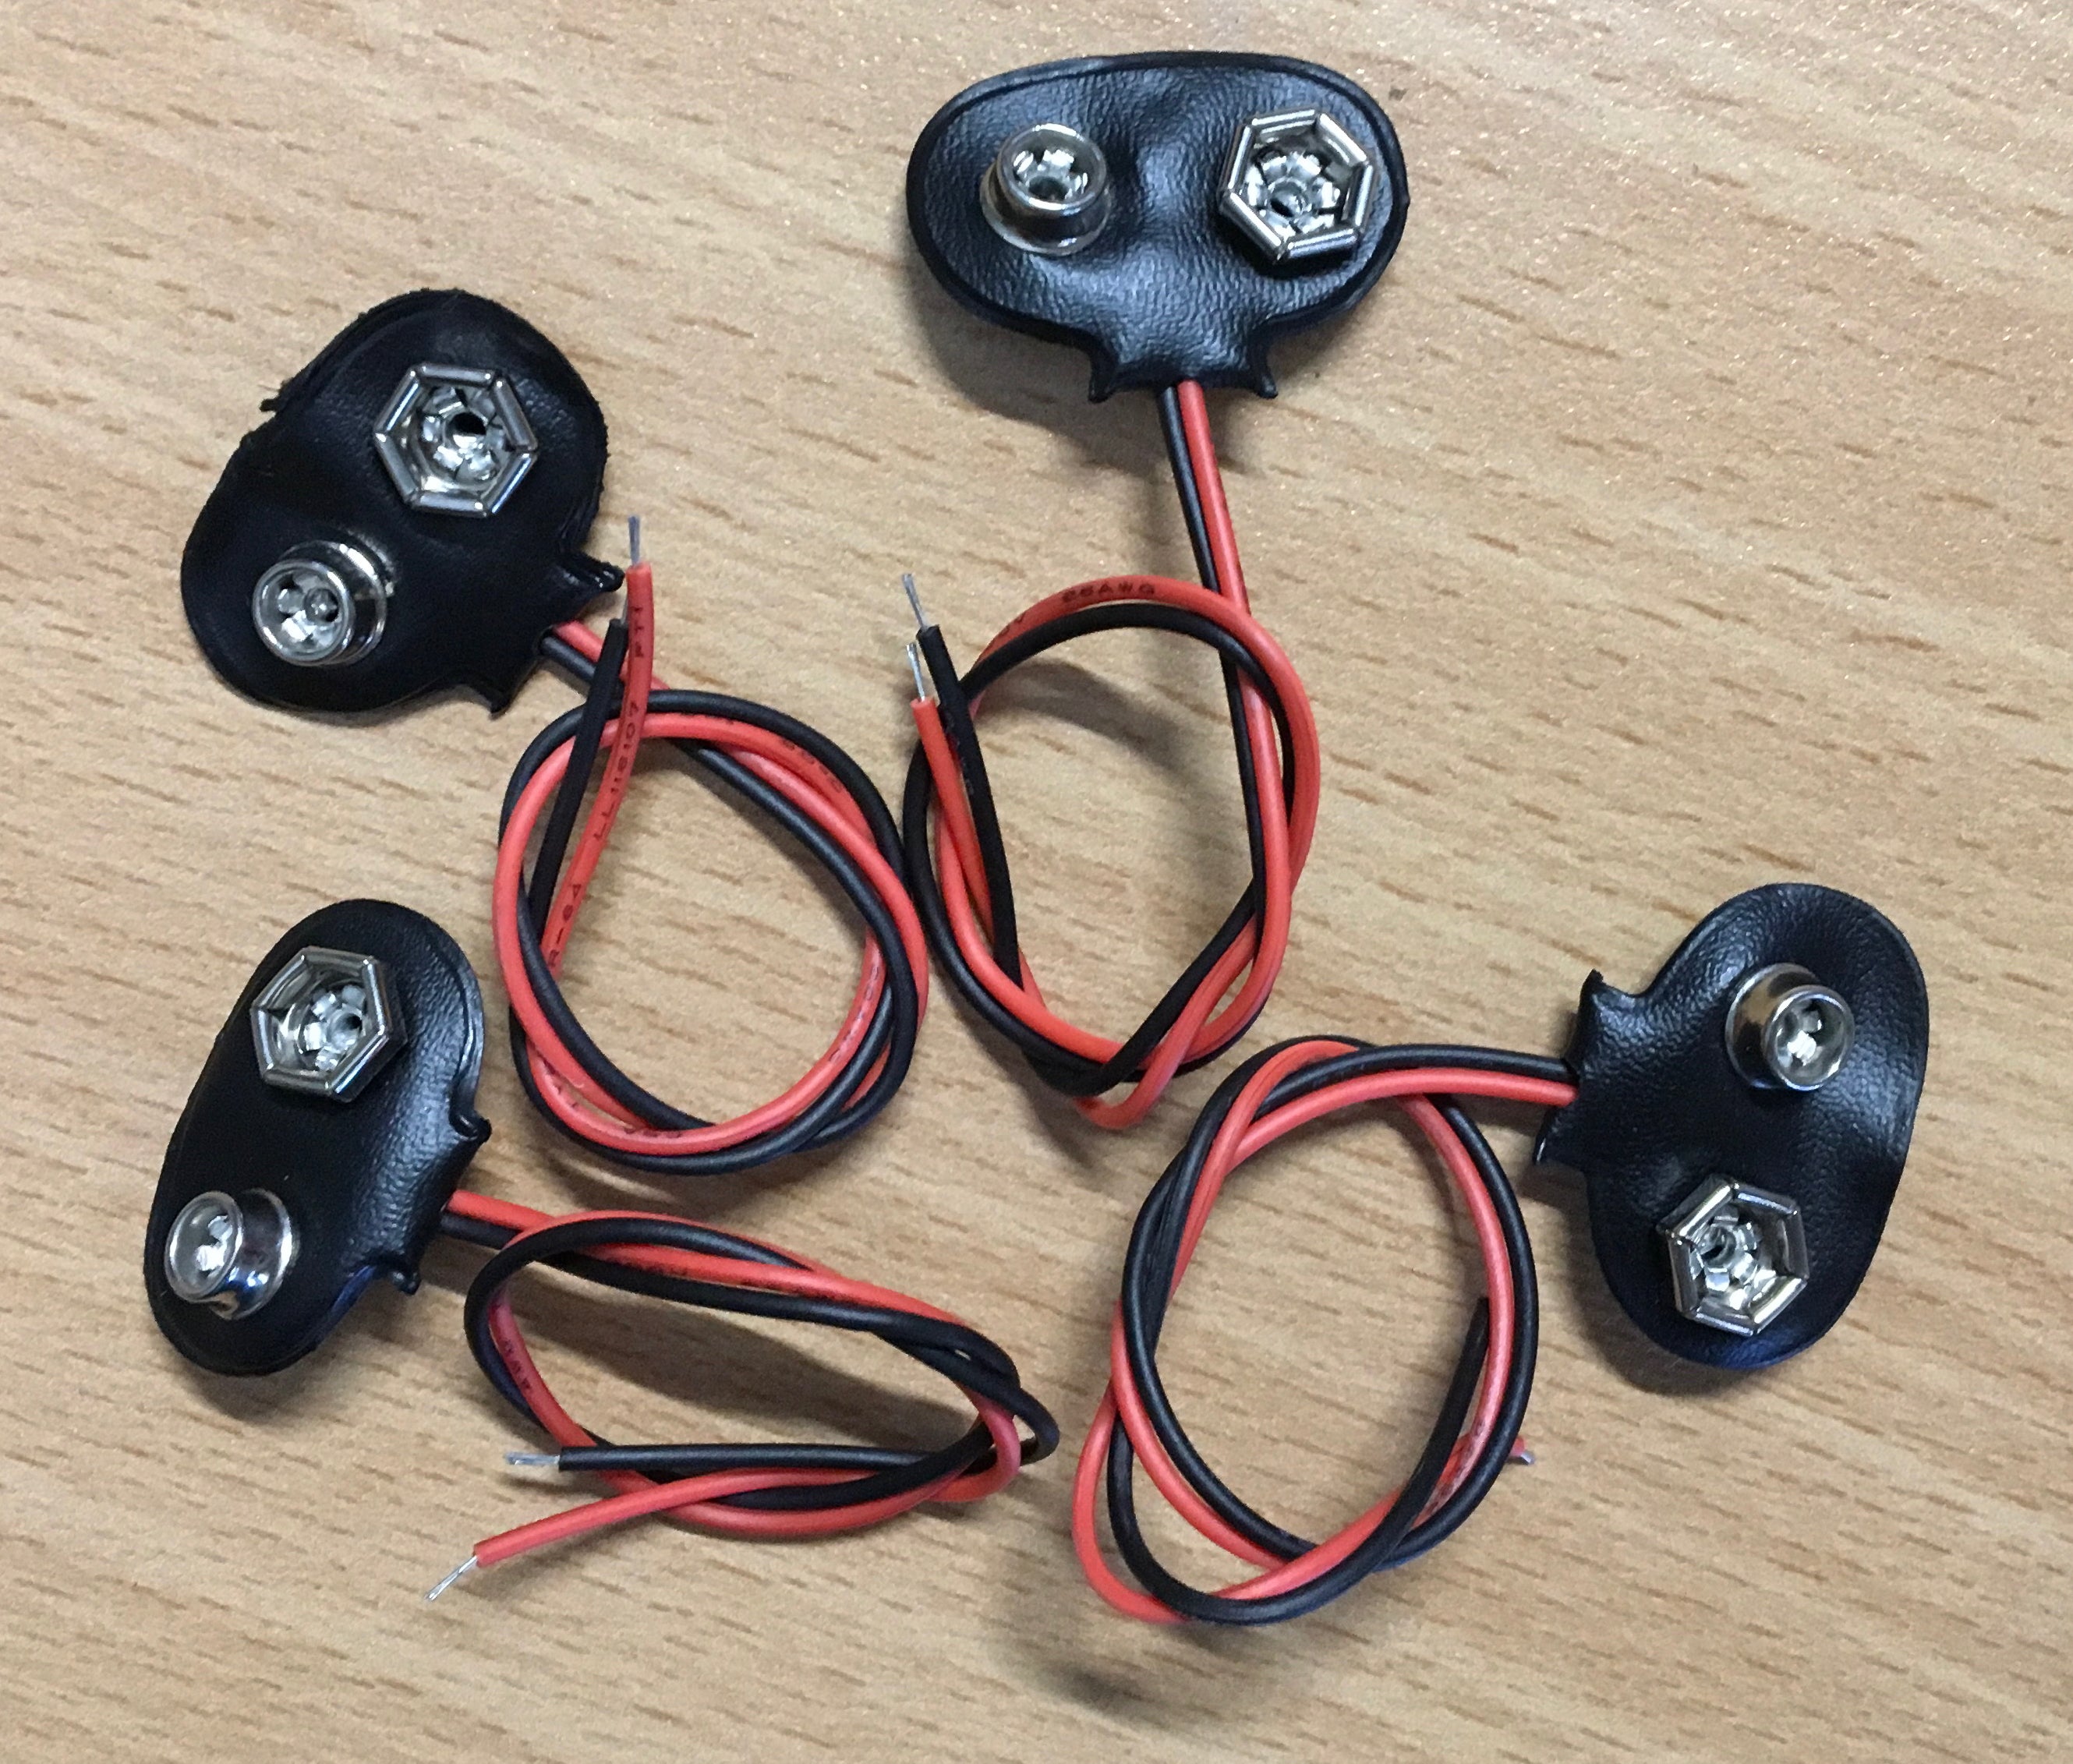 4 x 9V Battery Clips with bare cables - Server On The Move